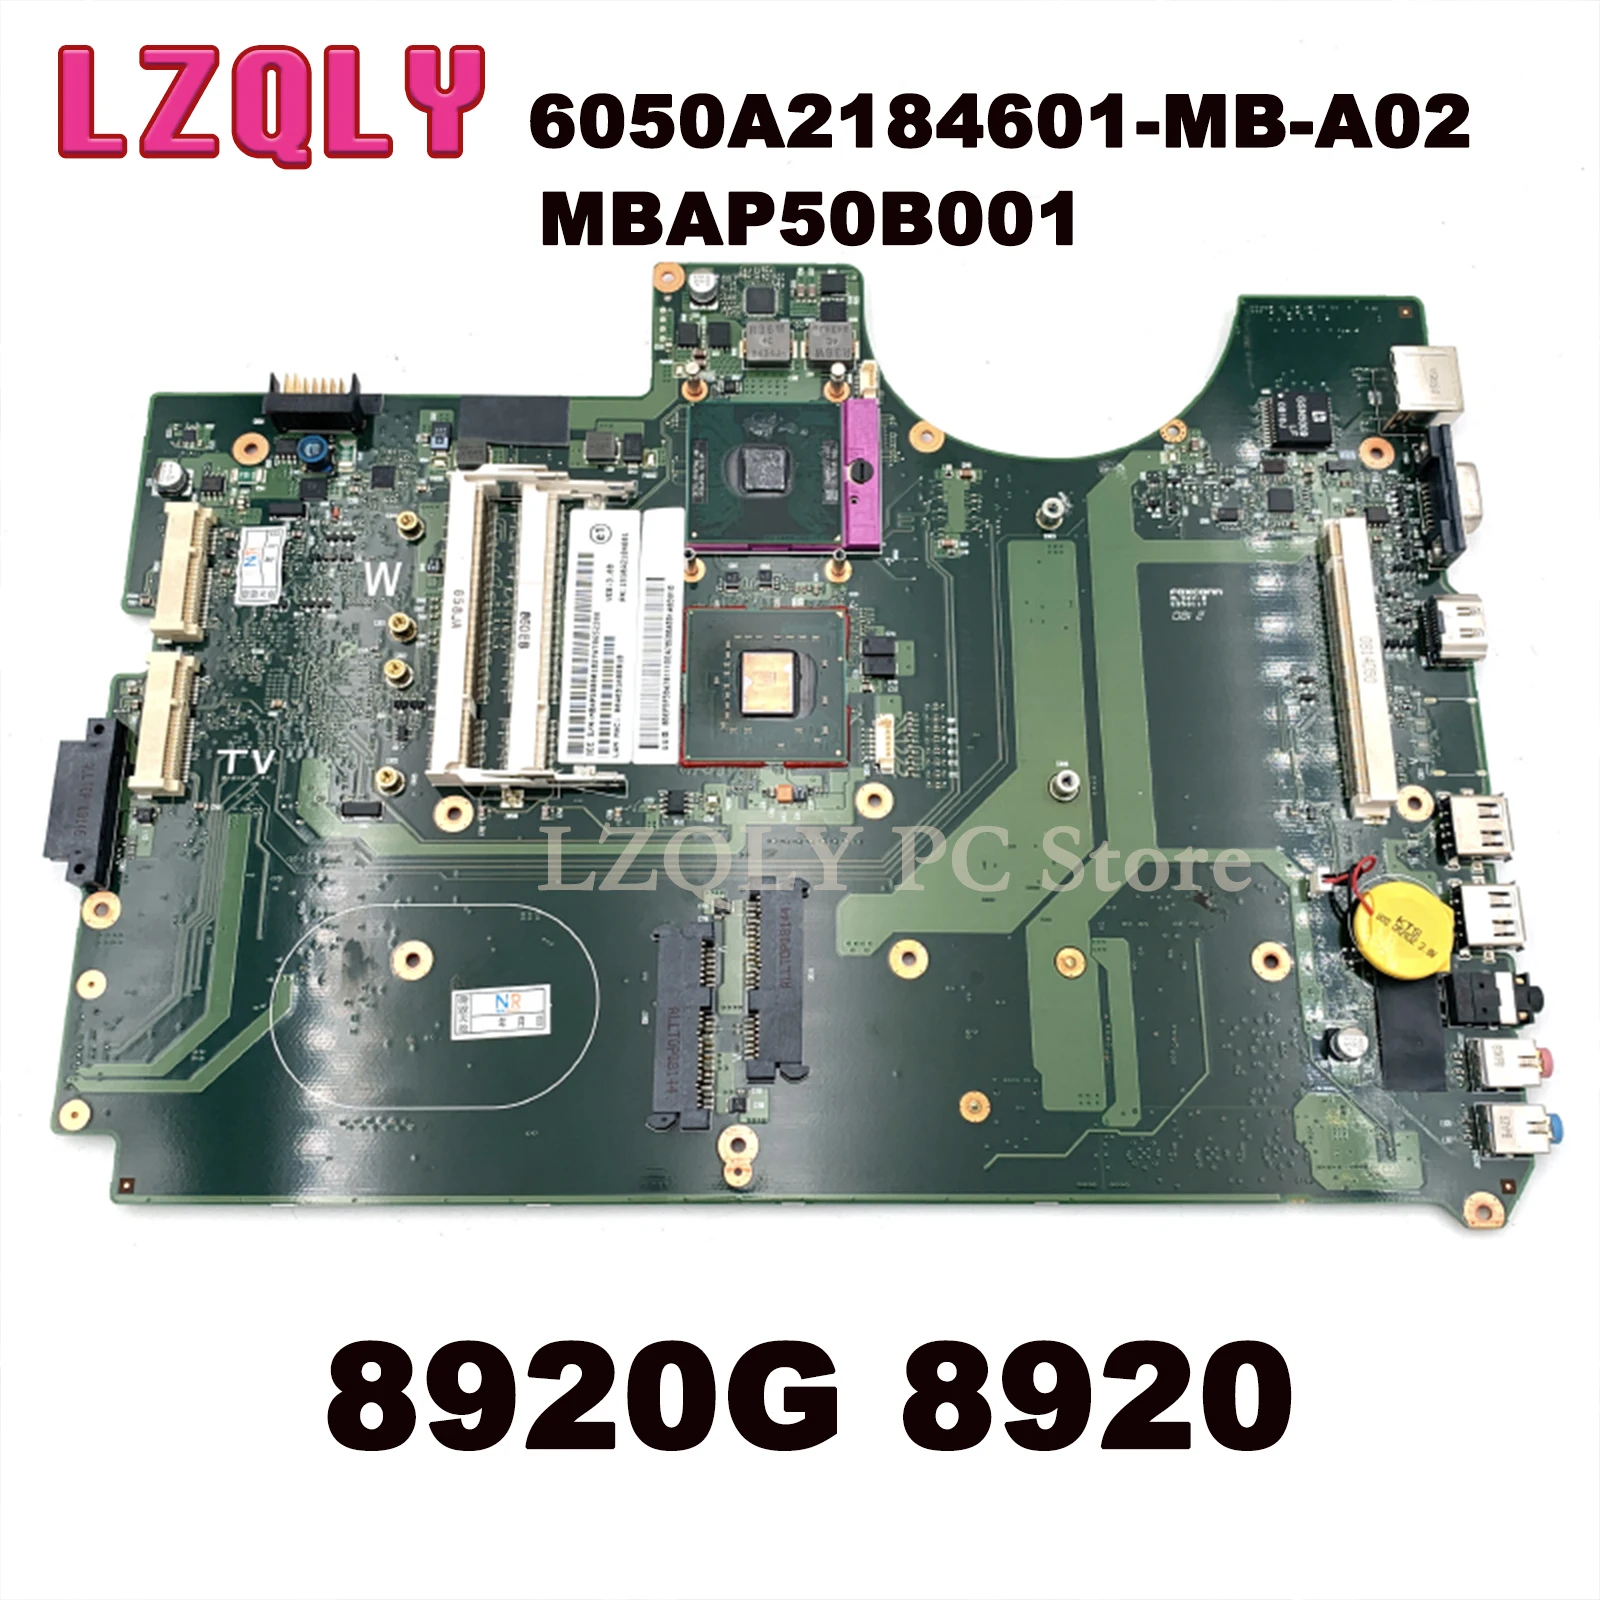 

LZQLY For Acer Apire 8920G 8920 Laptop Motherboard DDR2 Free CPU 6050A2184601-MB-A02 MBAP50B001 MAIN BOARD Fully Tested